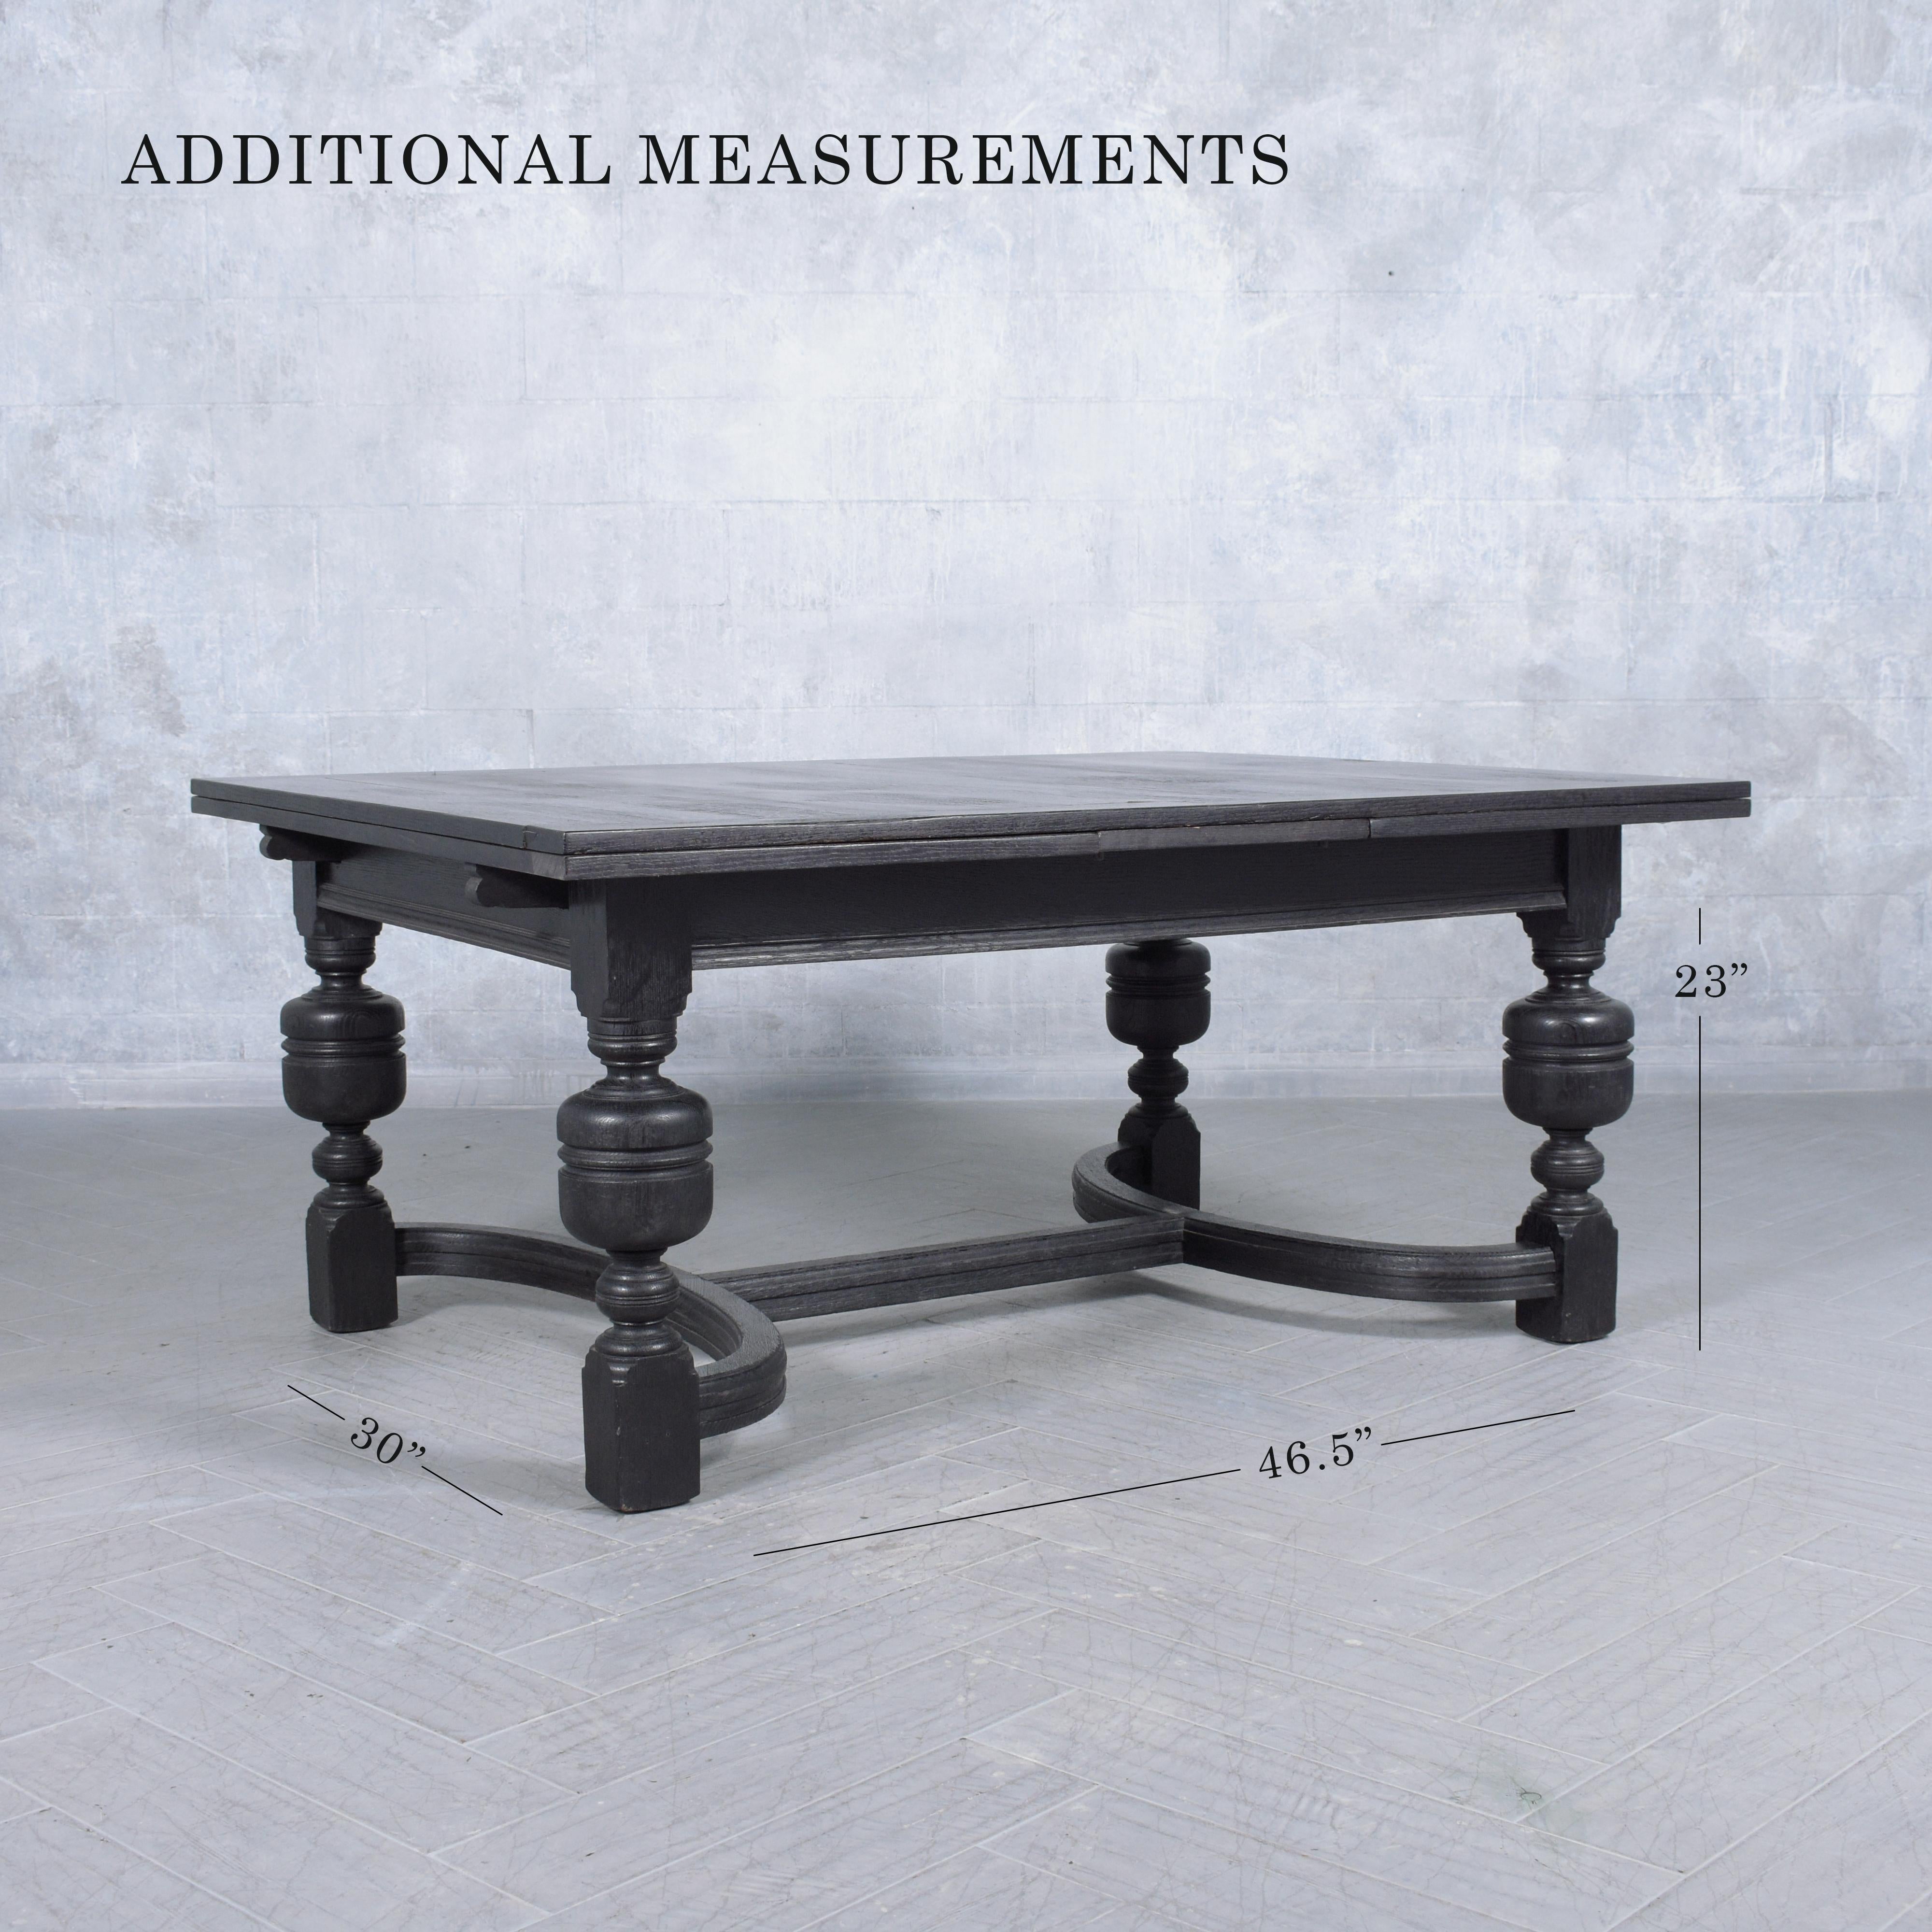 1850s Spanish Extendable Dining Table: Ebonized Solid Wood with French Design For Sale 8